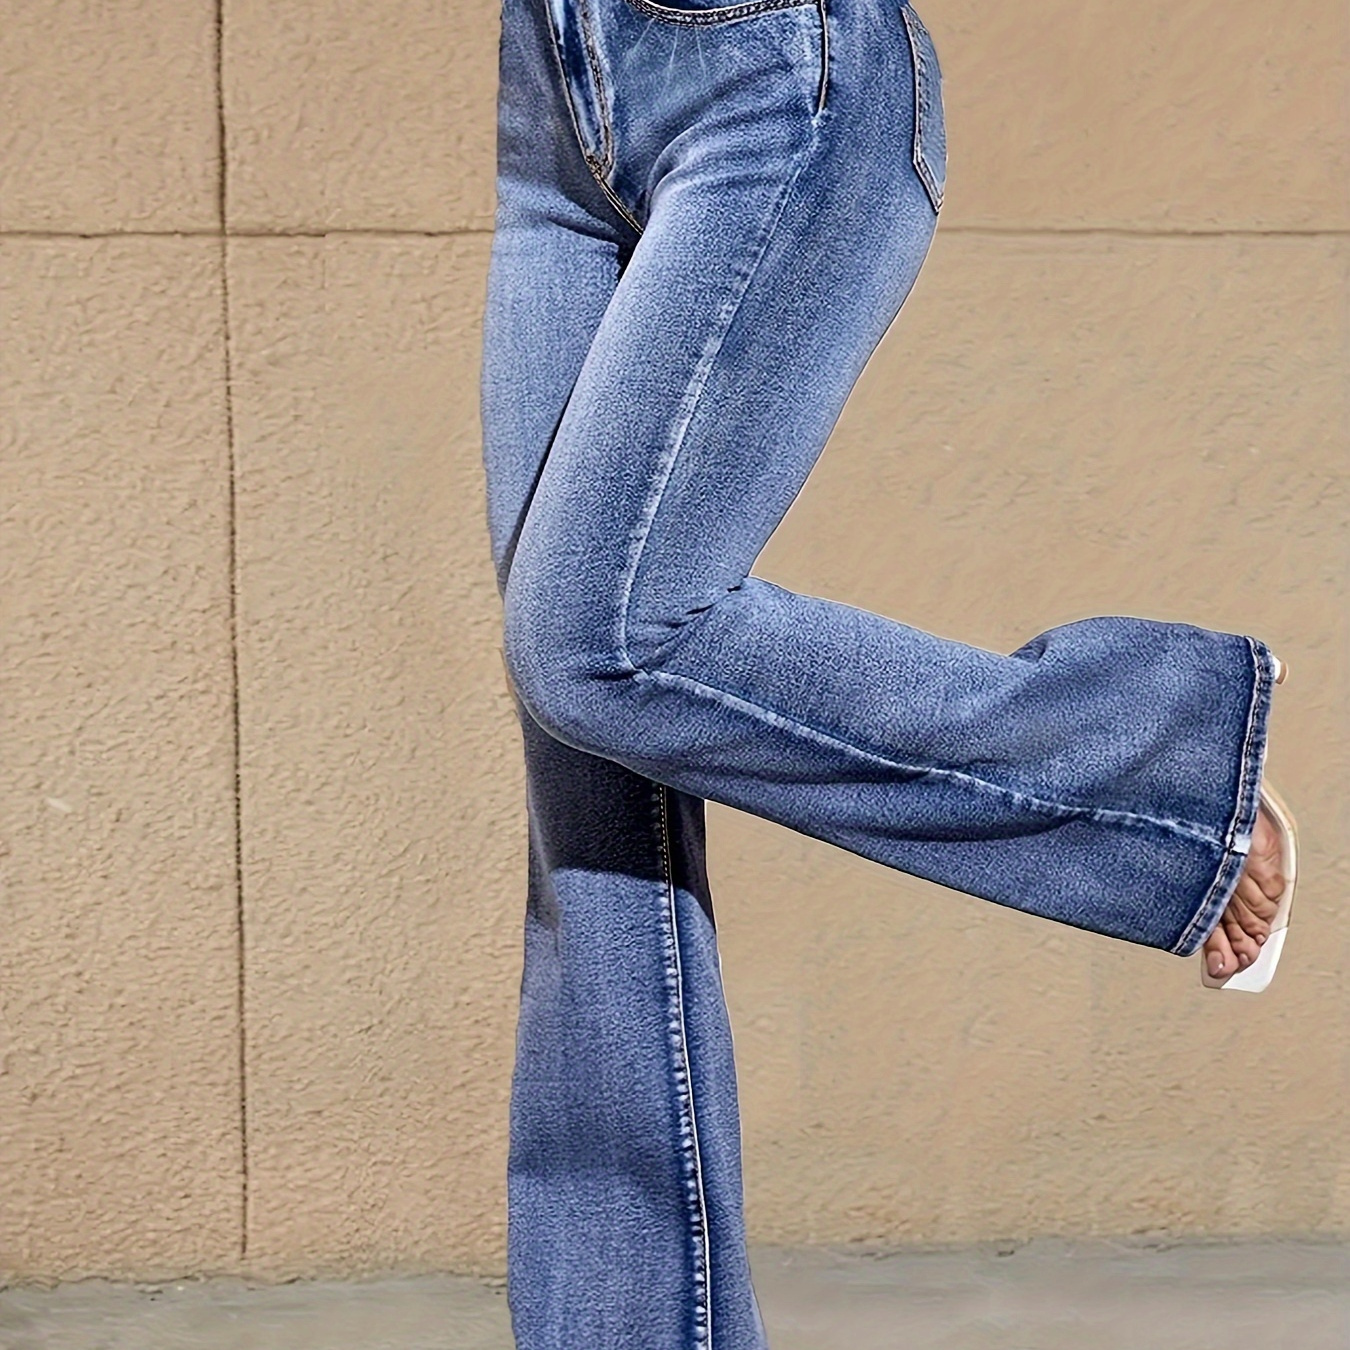 

Women's Casual Plain Washed Blue High-waist Flare Jeans, Stretchy Slim Fit Bell Bottom Denim Pants